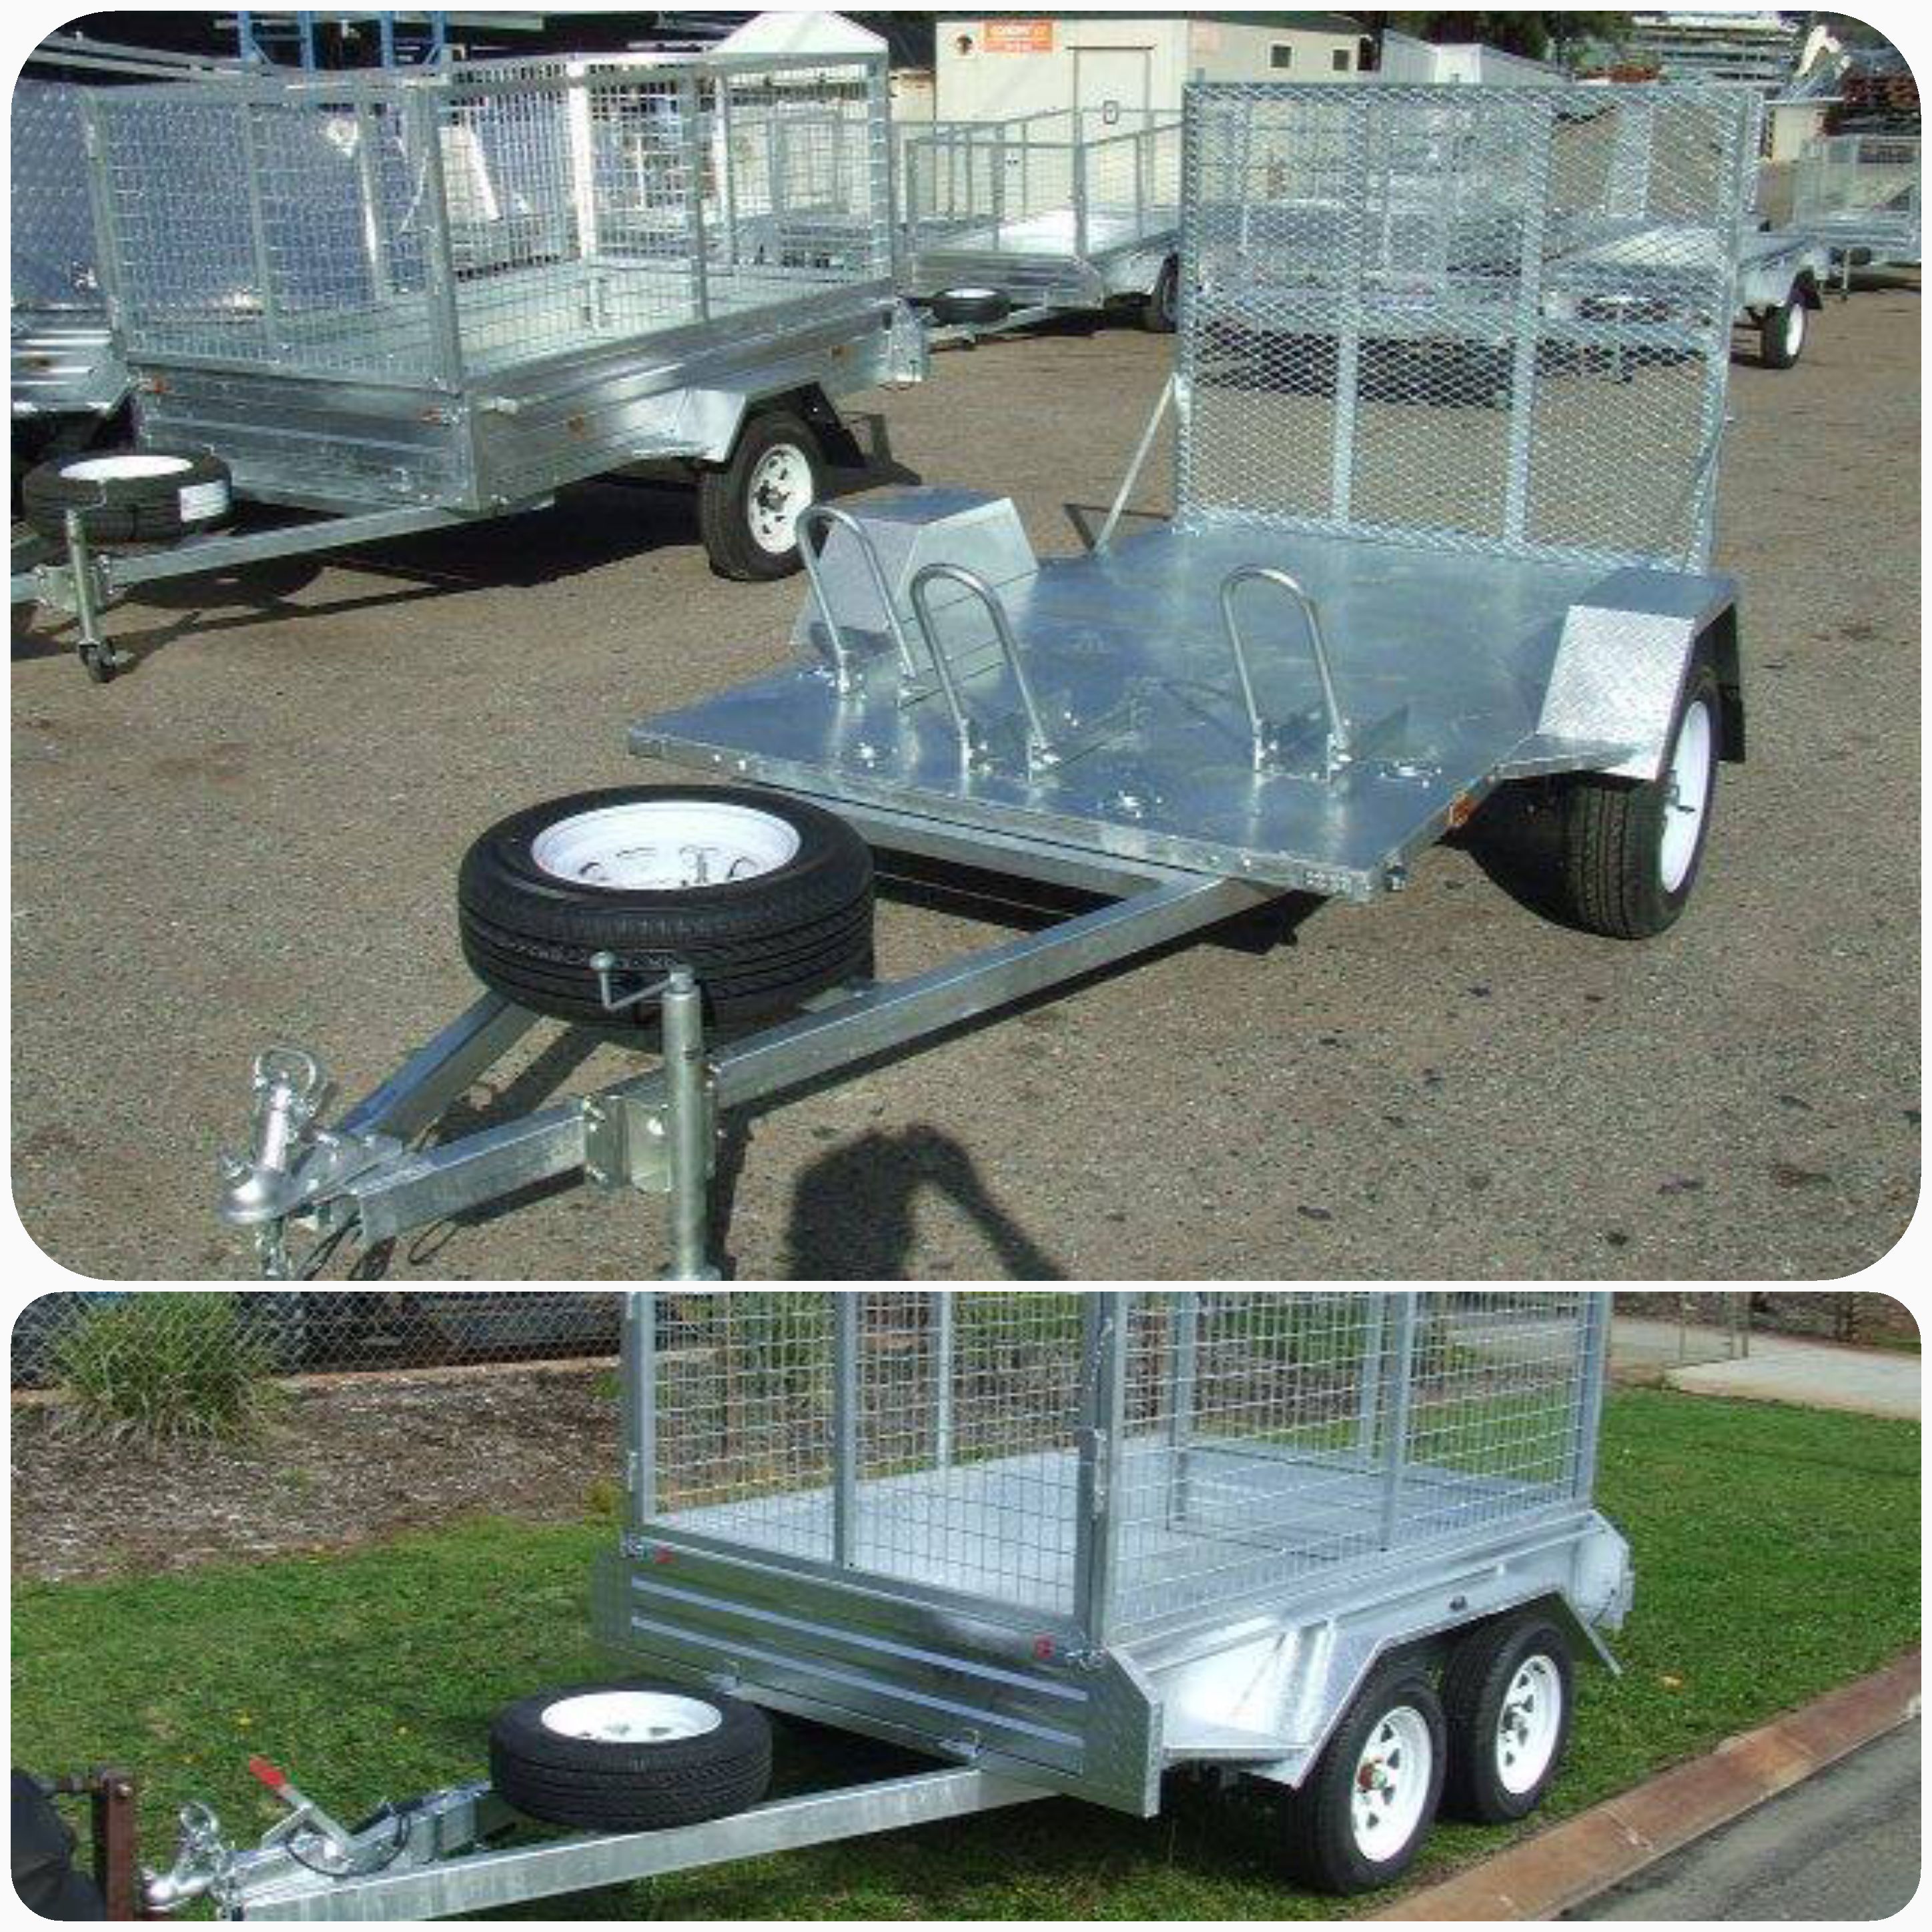 Trailer Supplier – Net $600,000 per year ....Business For Sale